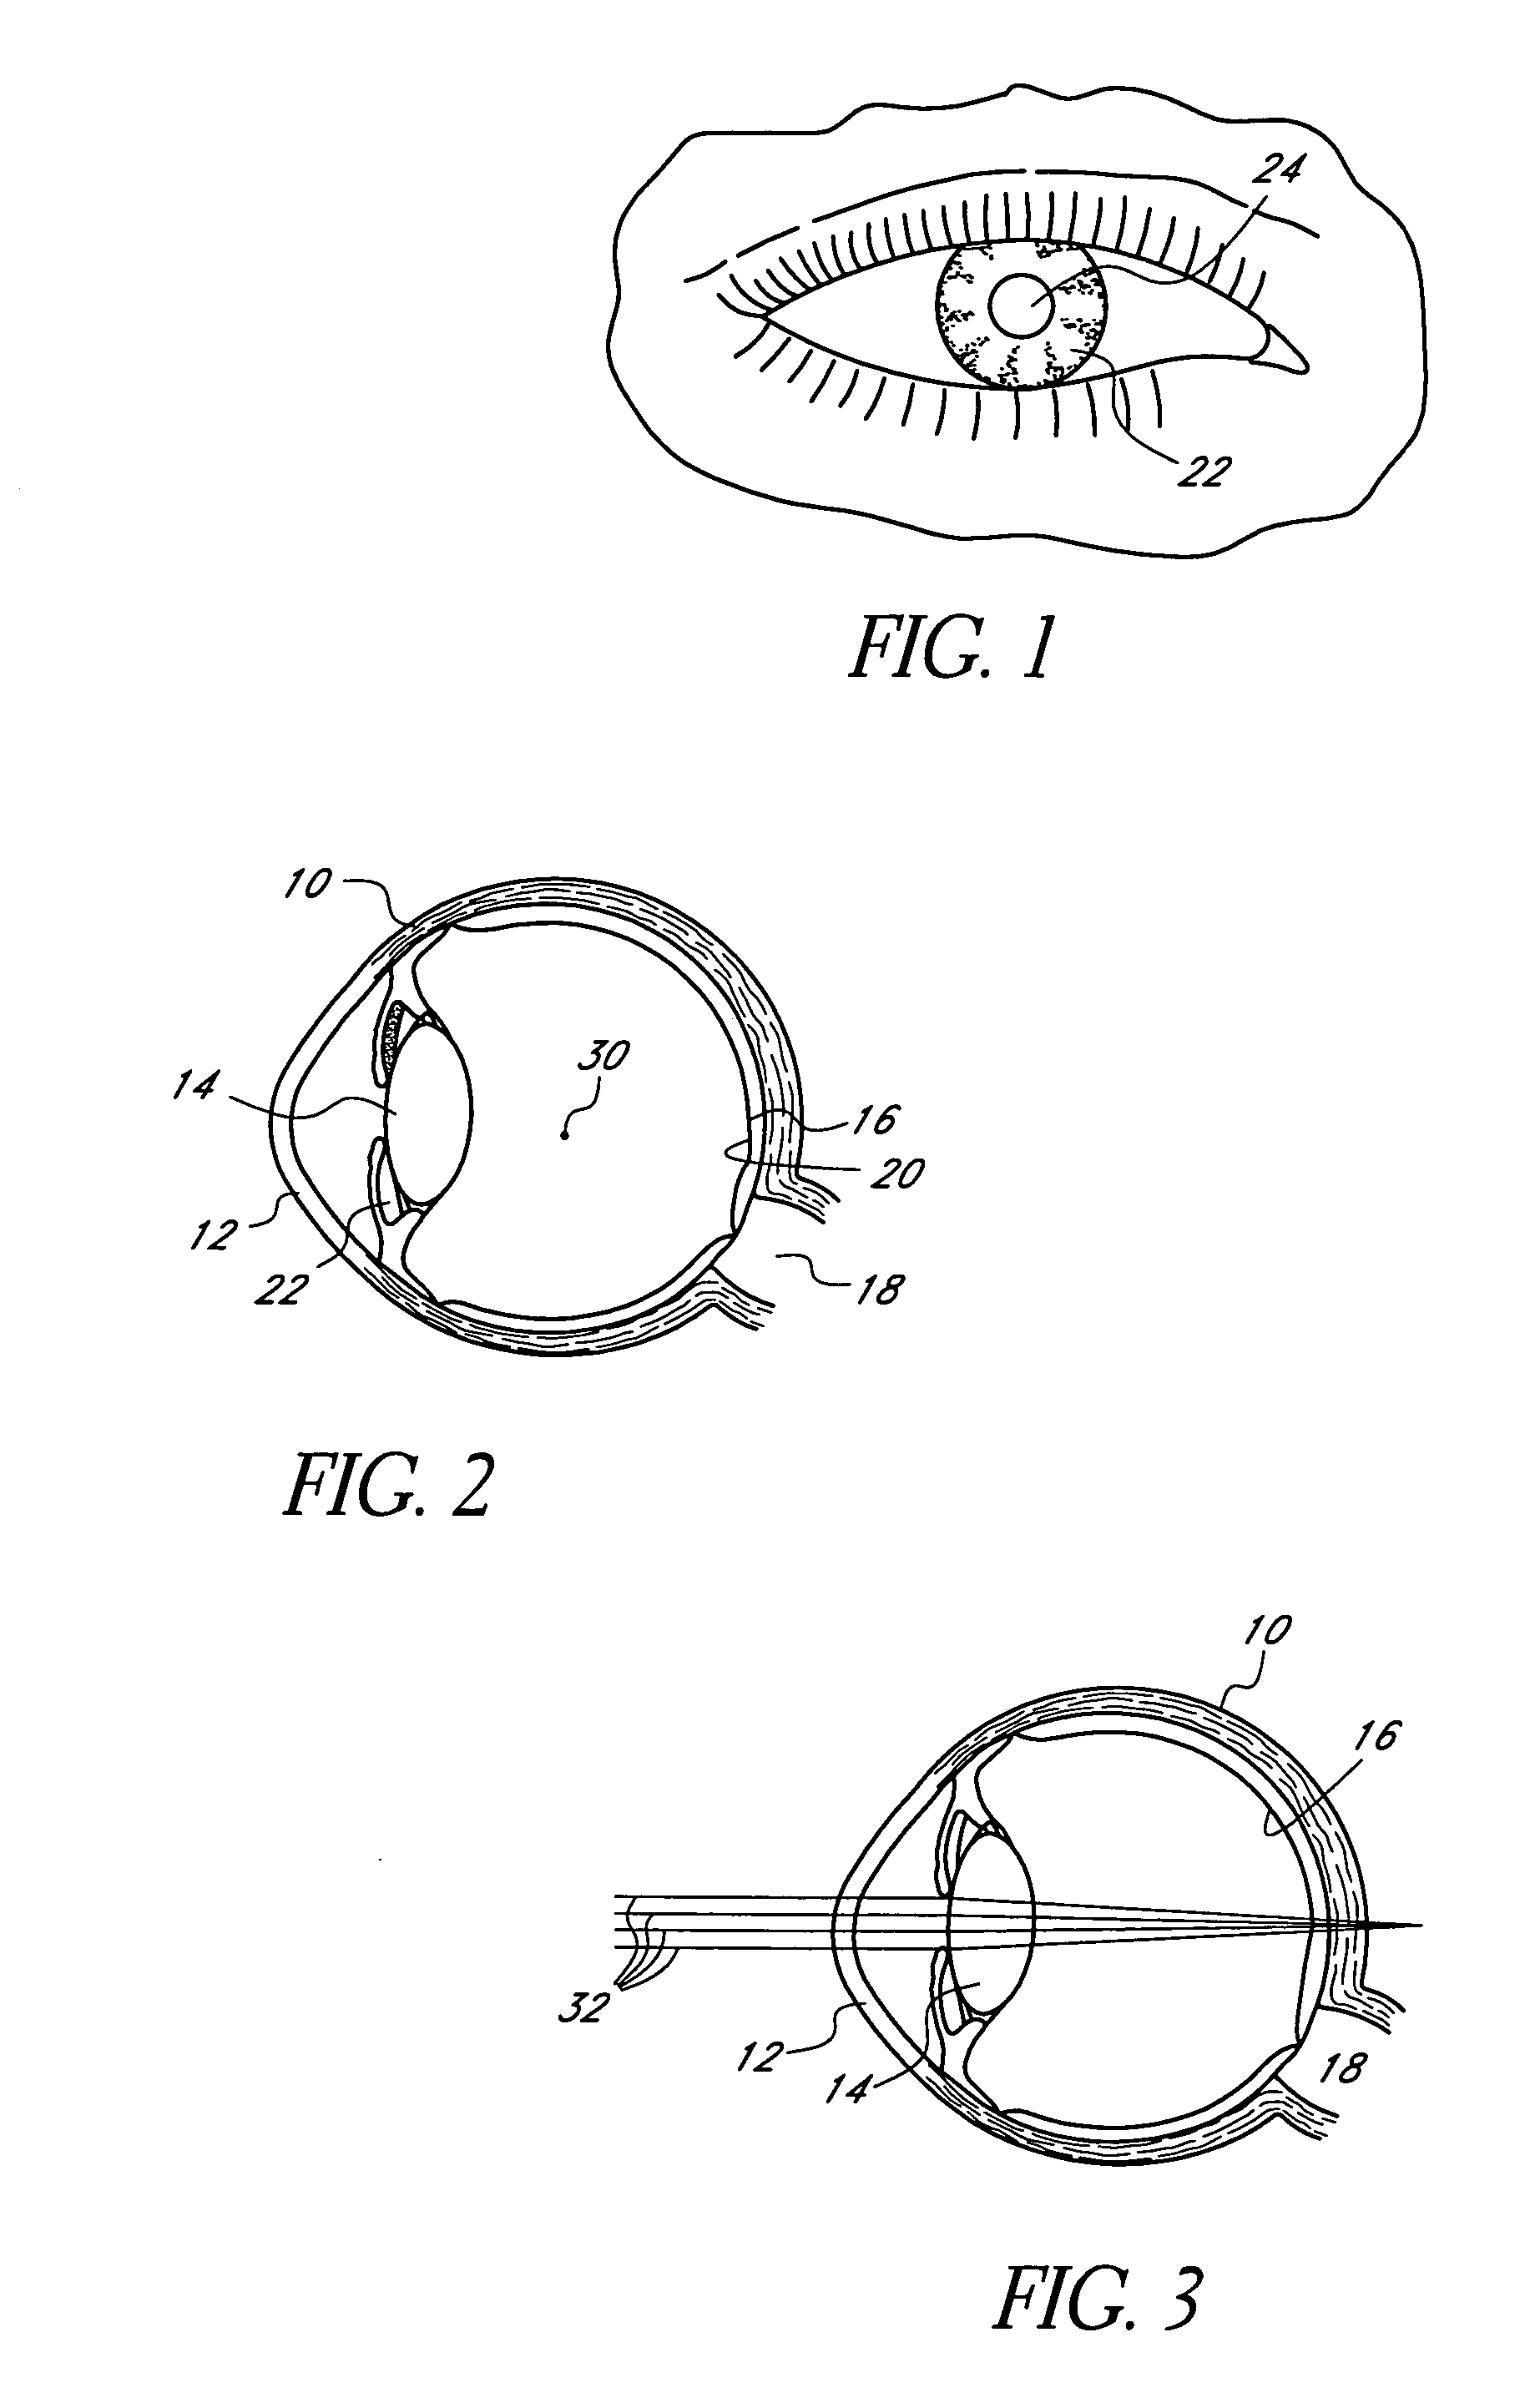 Corneal optic formed of degradation resistant polymer